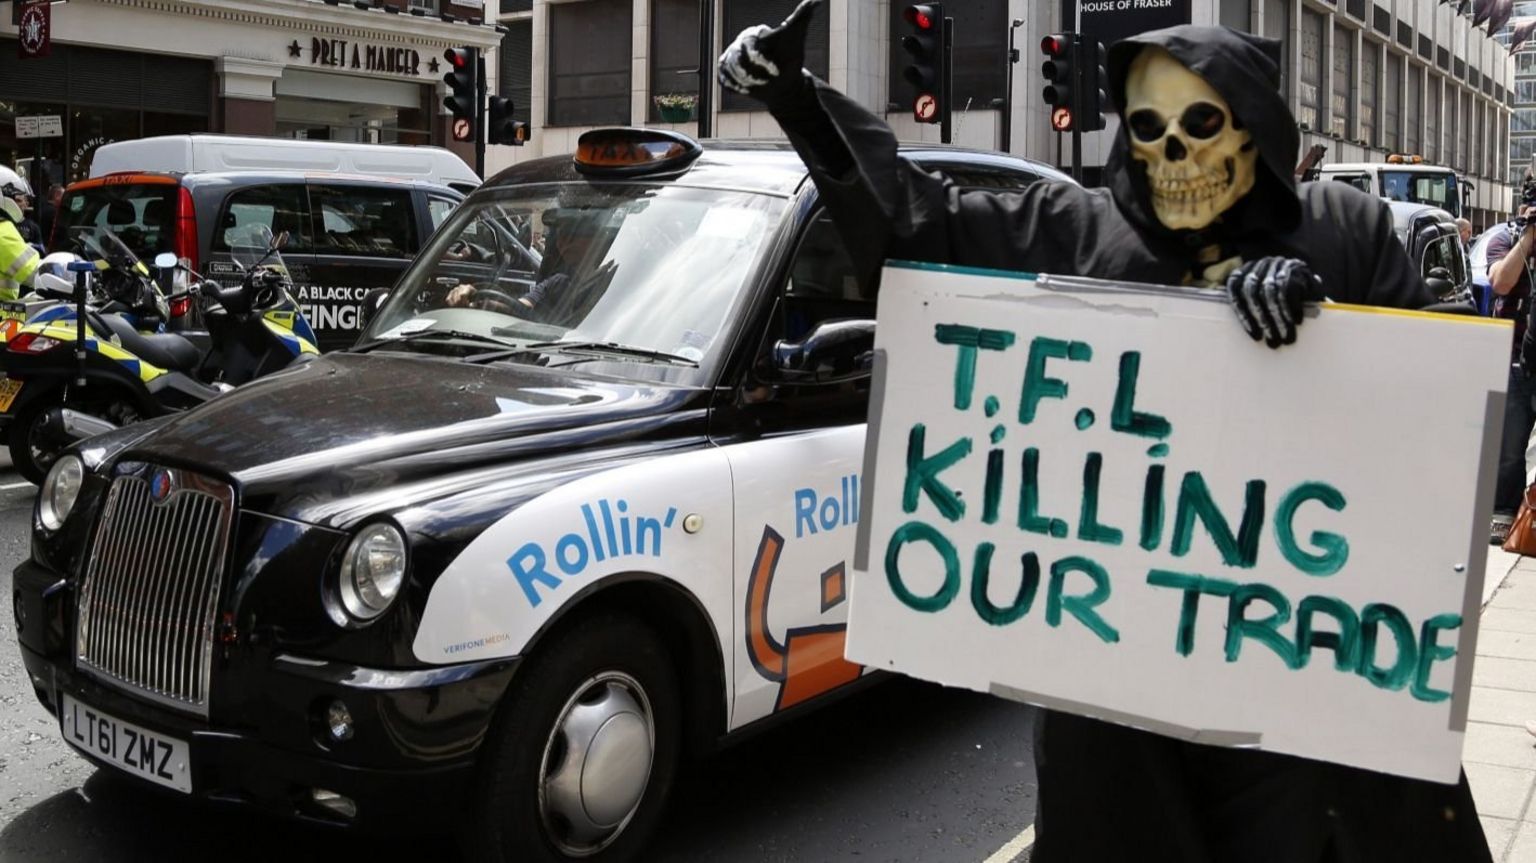 Black cab drivers protest in London, May 26, 2015